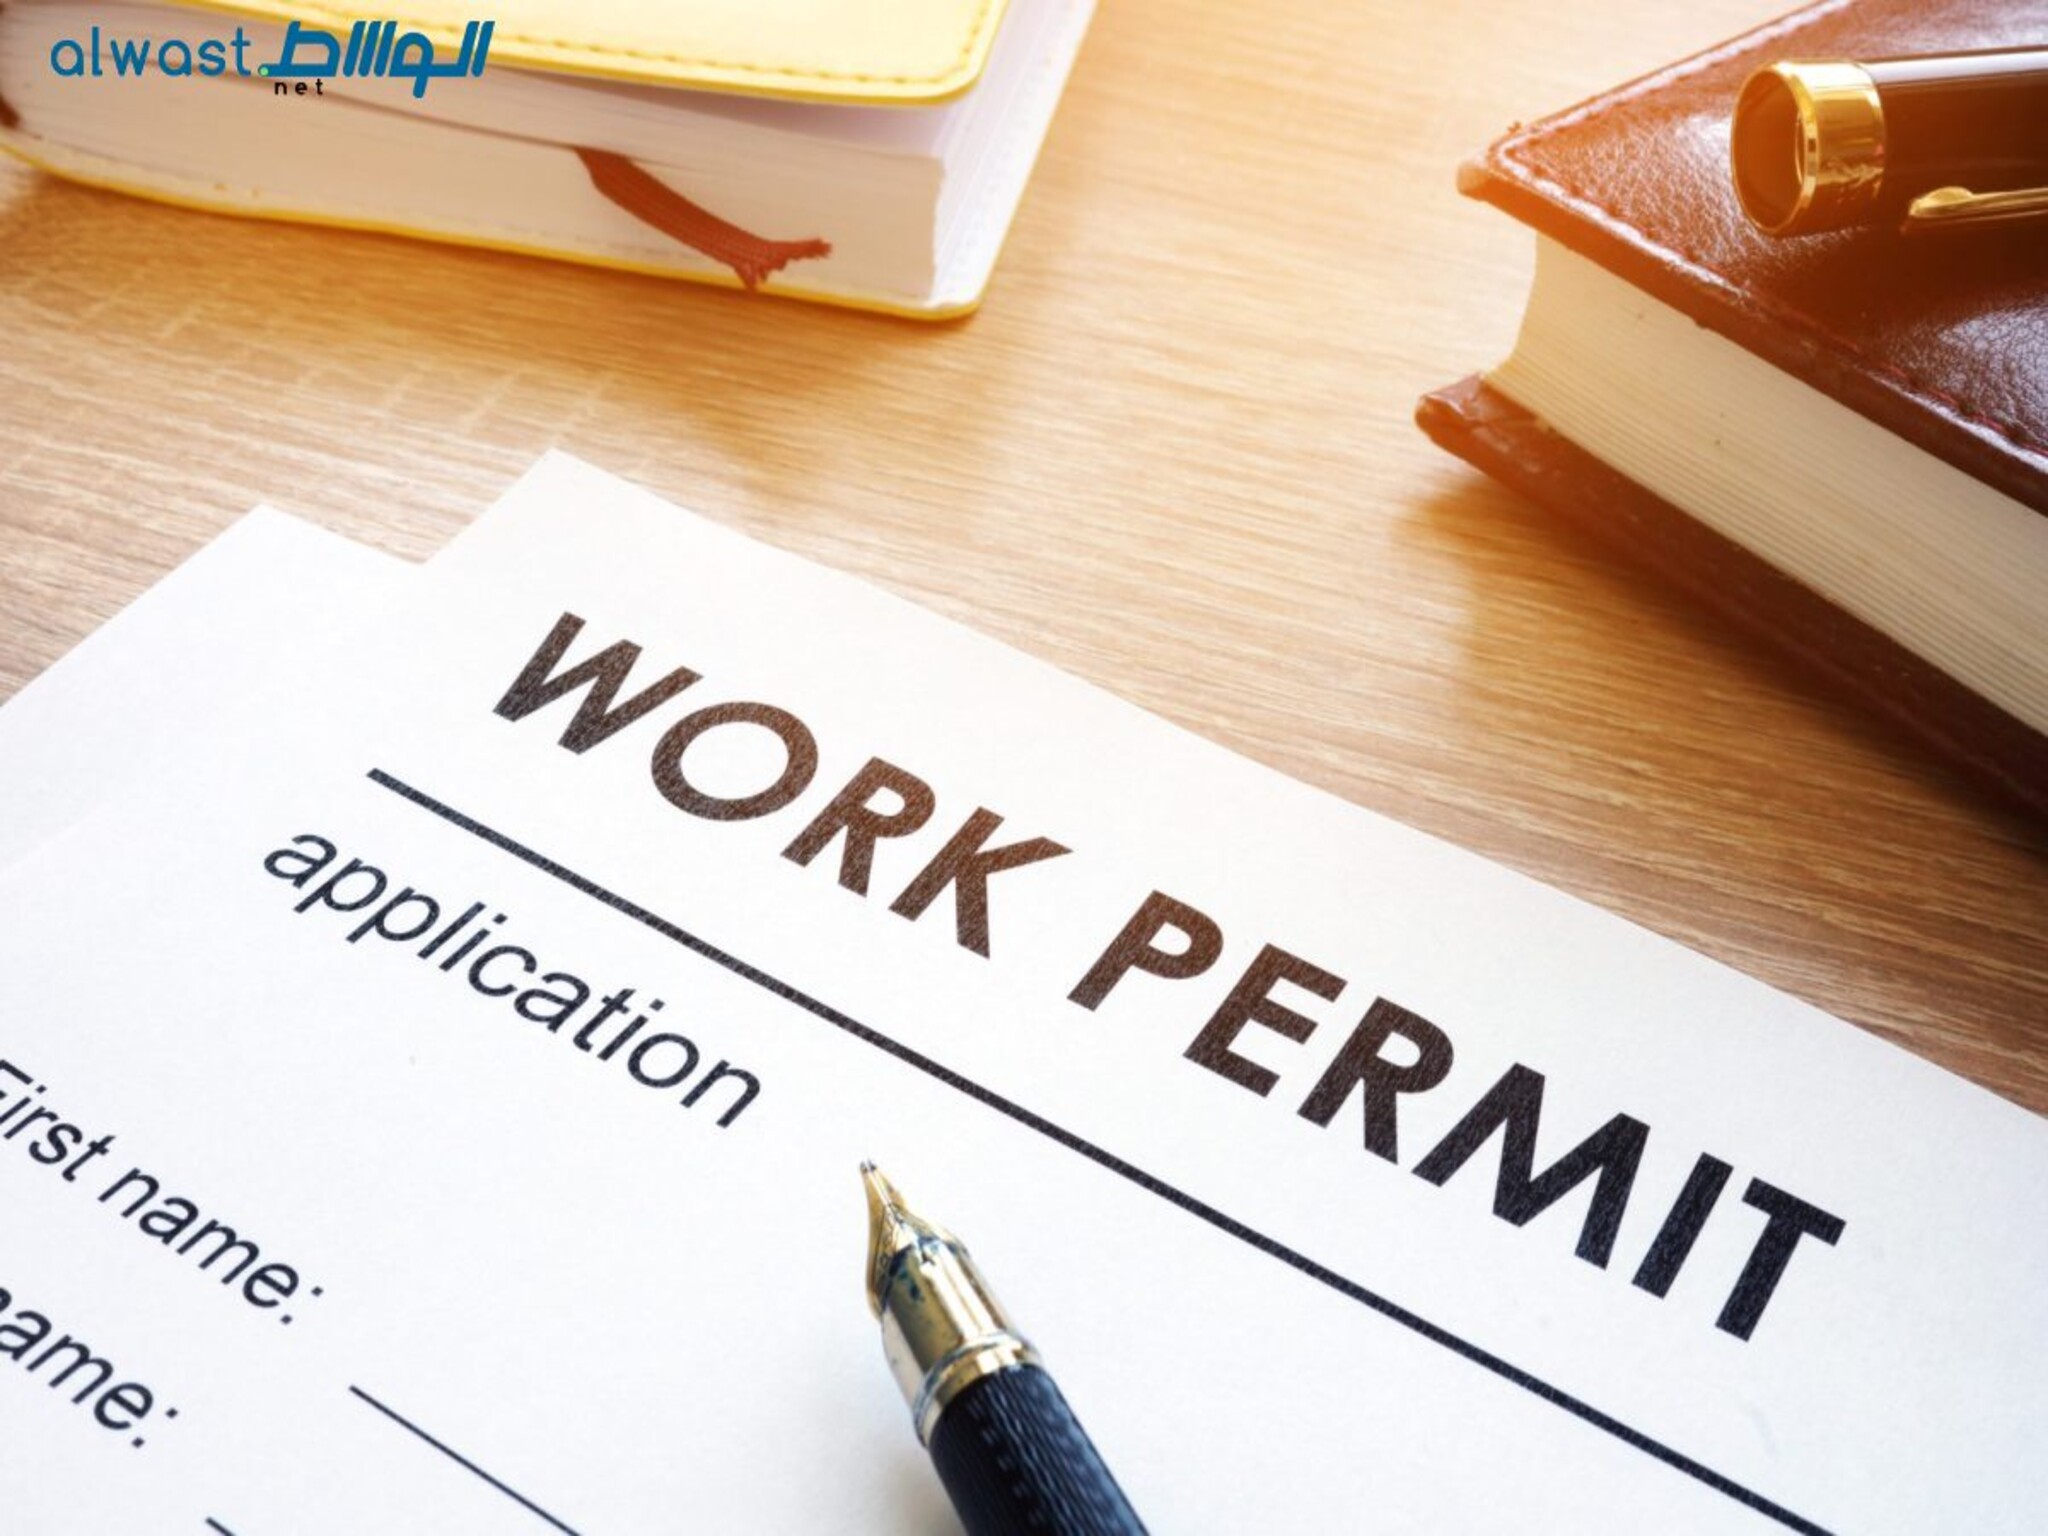 UAE sets 13 types of permits allow establishments to recruit & employ workers